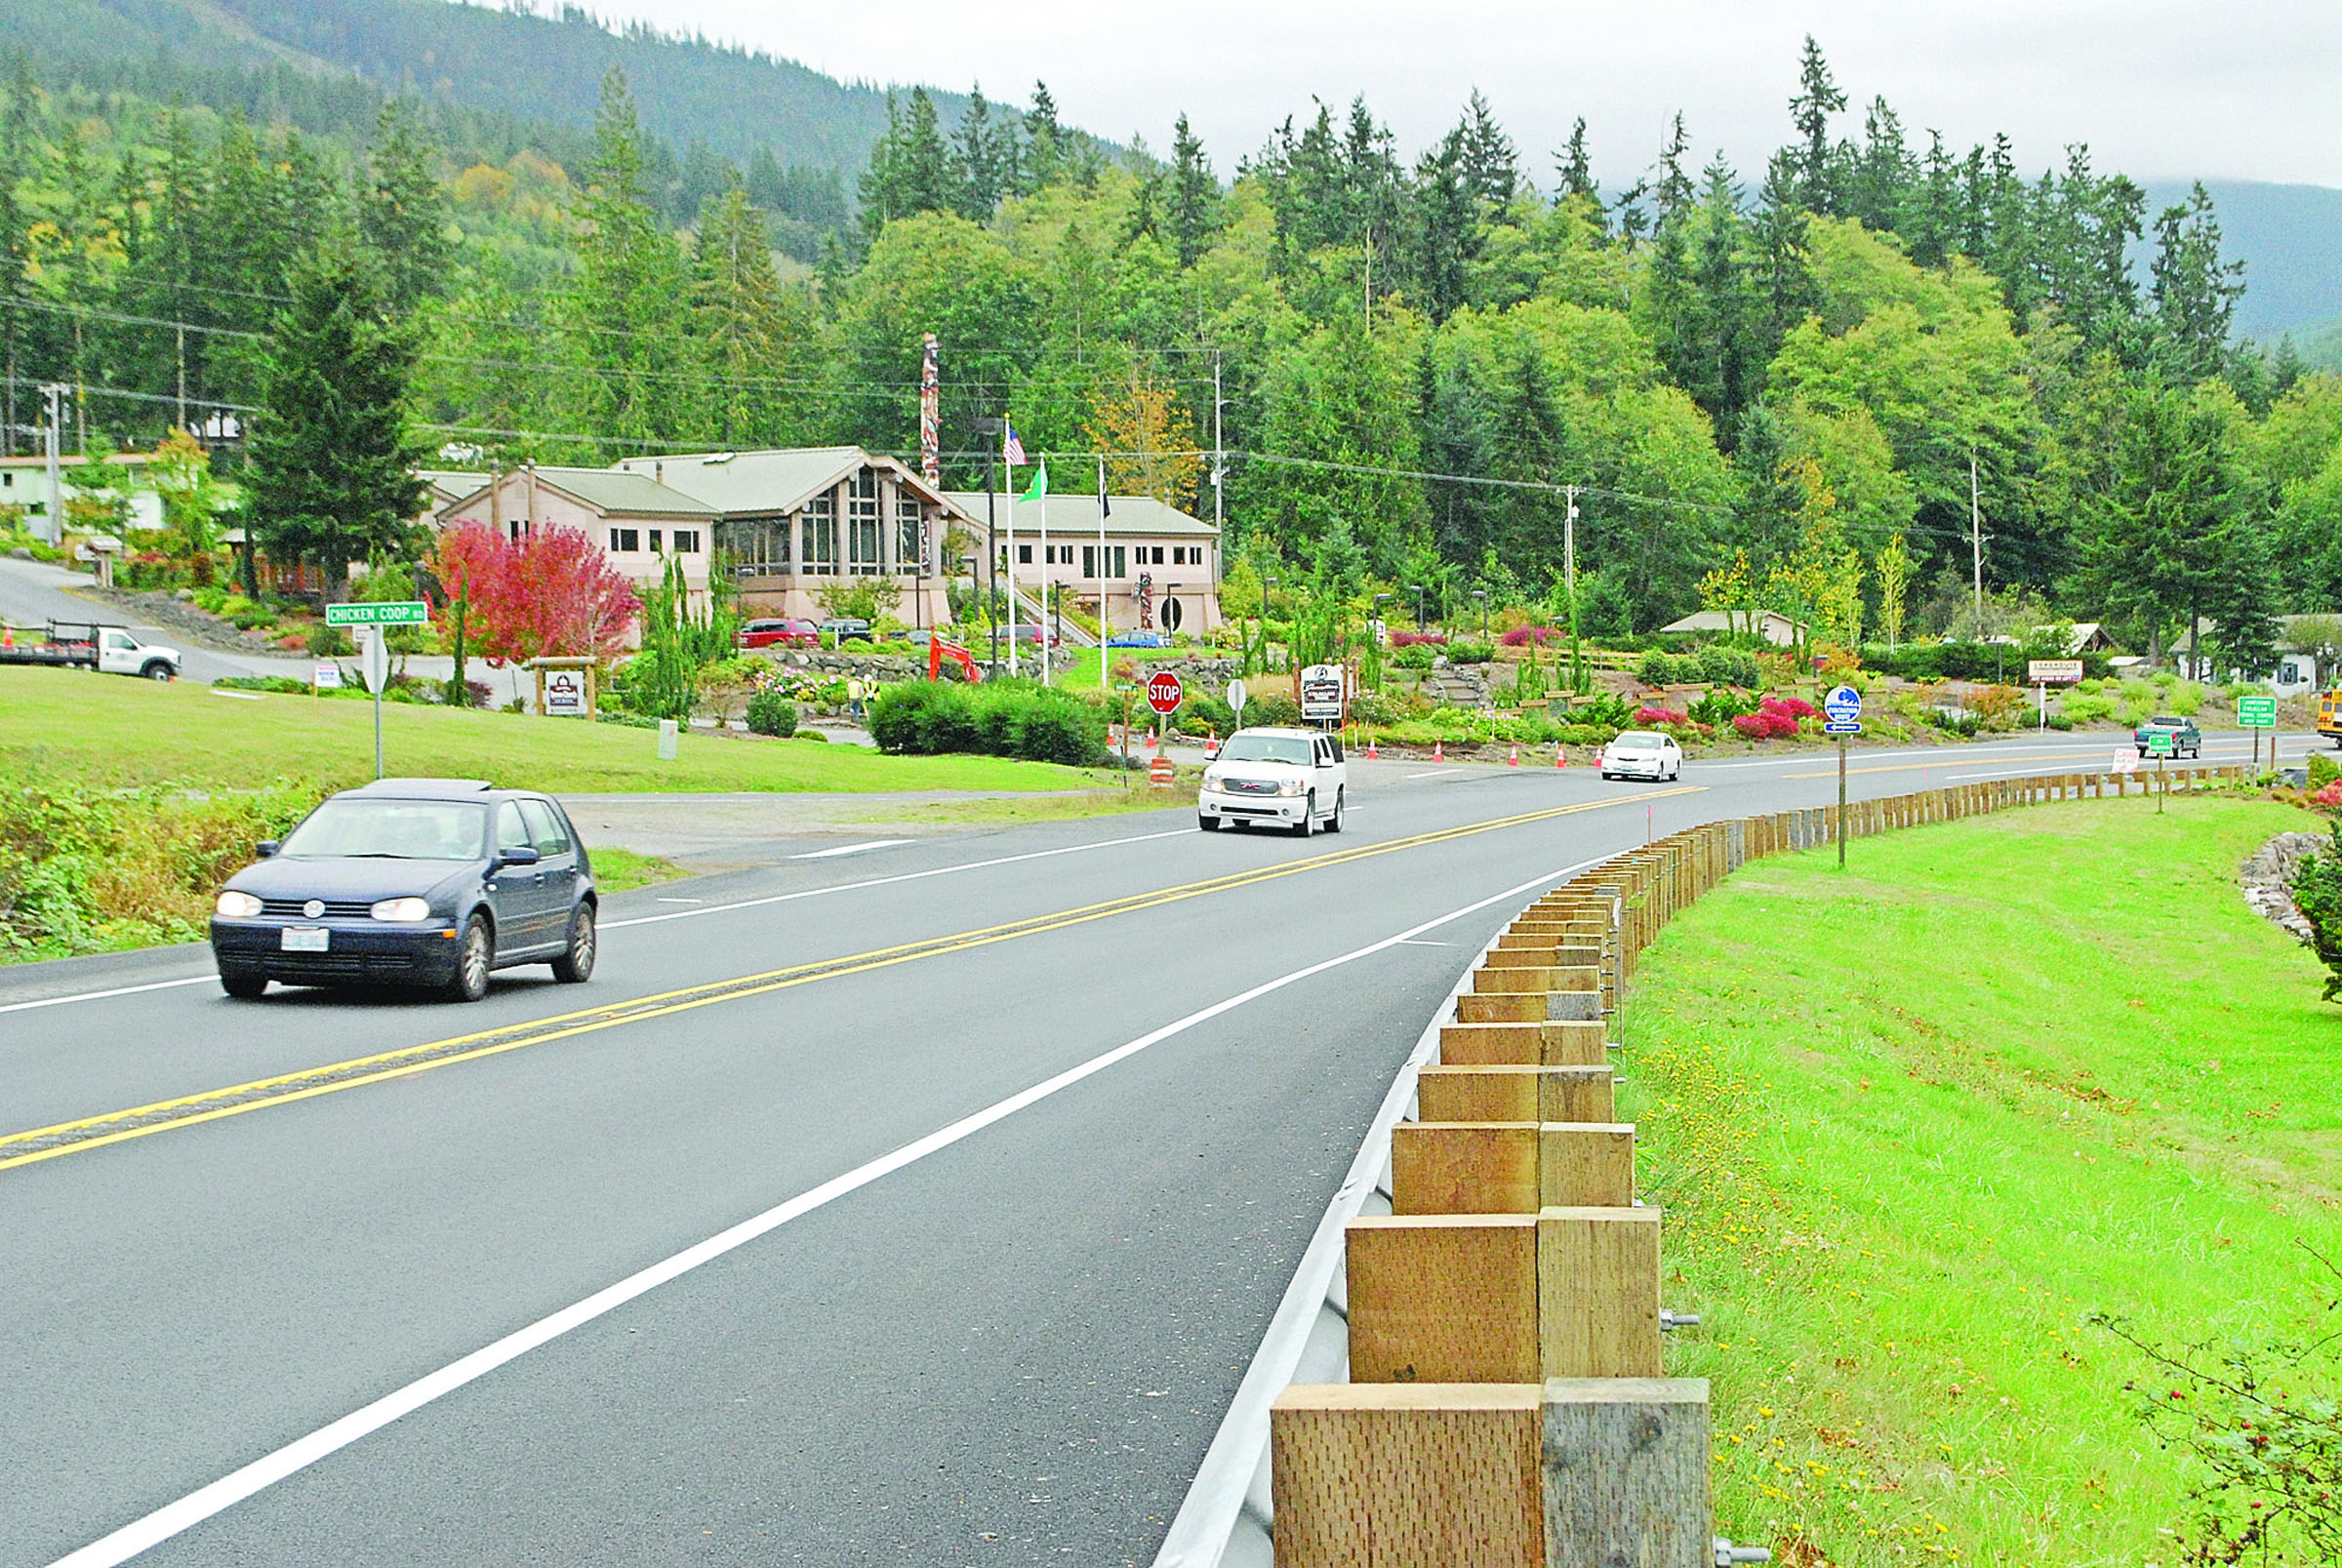 The Jamestown S’Klallam tribe has turned its attention to turning the double intersection of Chicken Coop and Zaccardo roads at U.S. Highway 101 into one intersection. The tribe is also planning “traffic calming” improvements along the stretch of Old Blyn Highway that runs parallel to this link of Highway 101.  --Photo by Jeff Chew/Peninsula Daily News